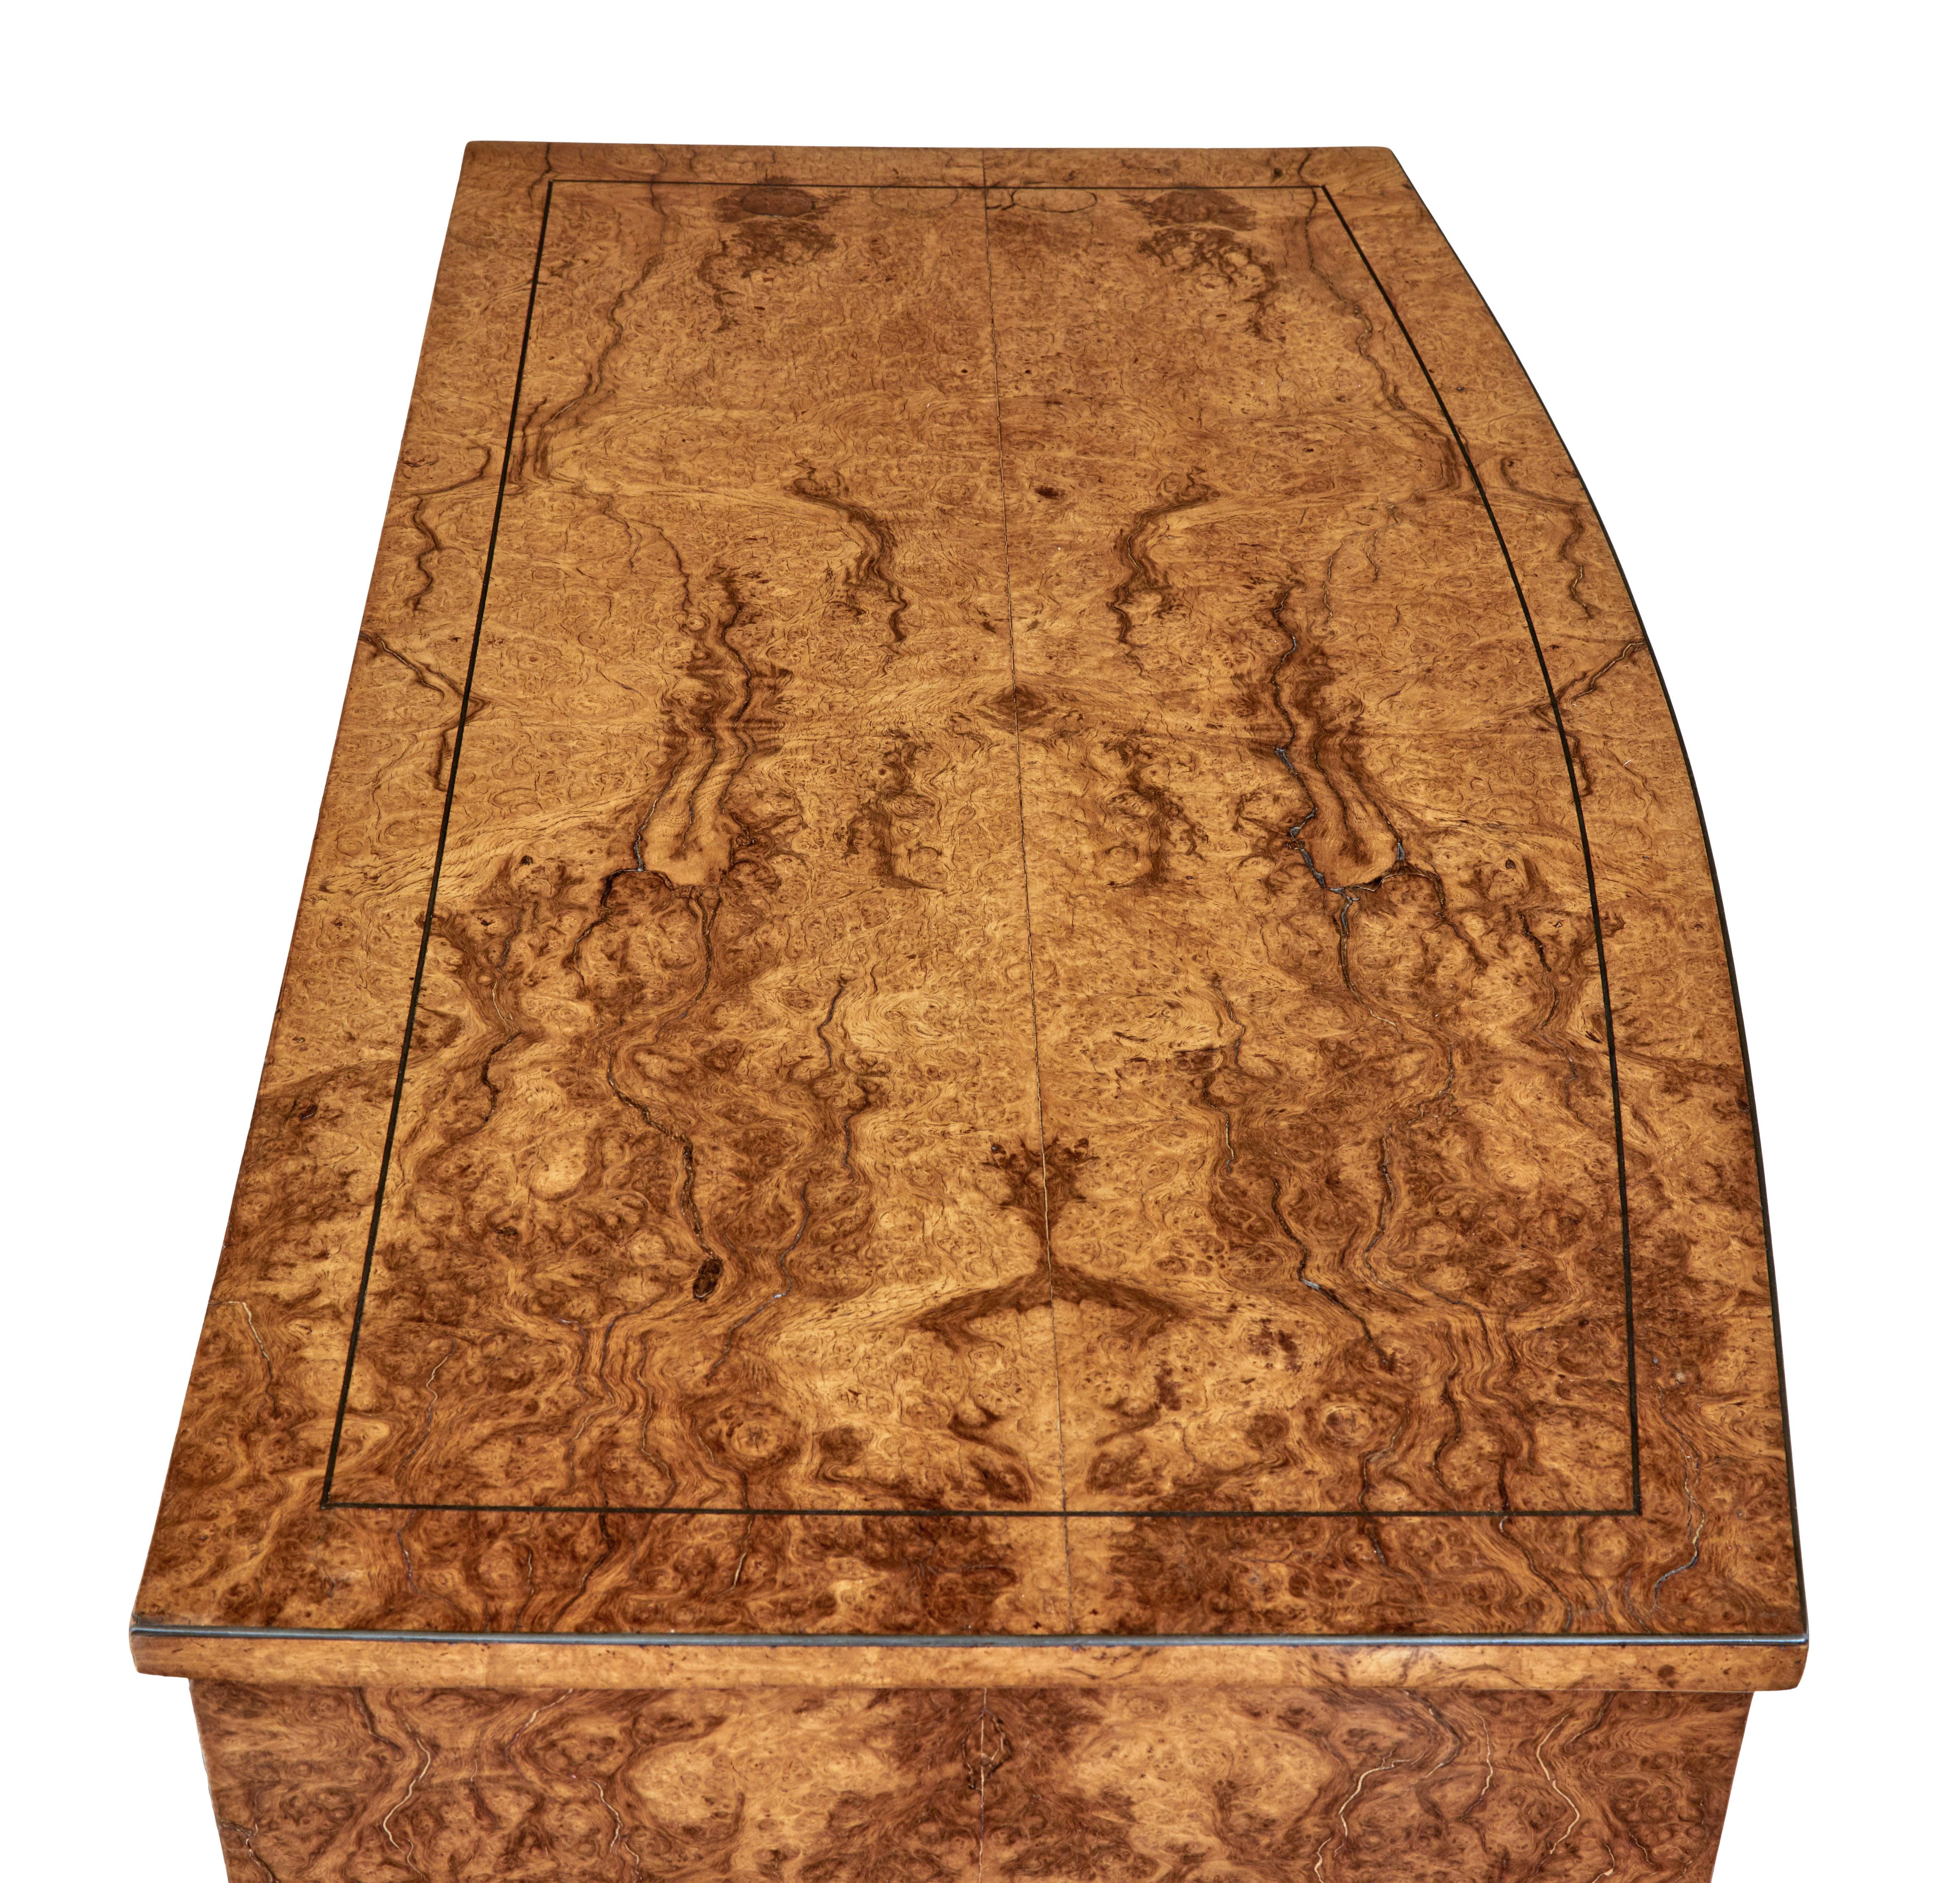 19th Century English Burr Walnut Bow Front Chest of Drawers circa 1870 with Bookmatch Veneer For Sale